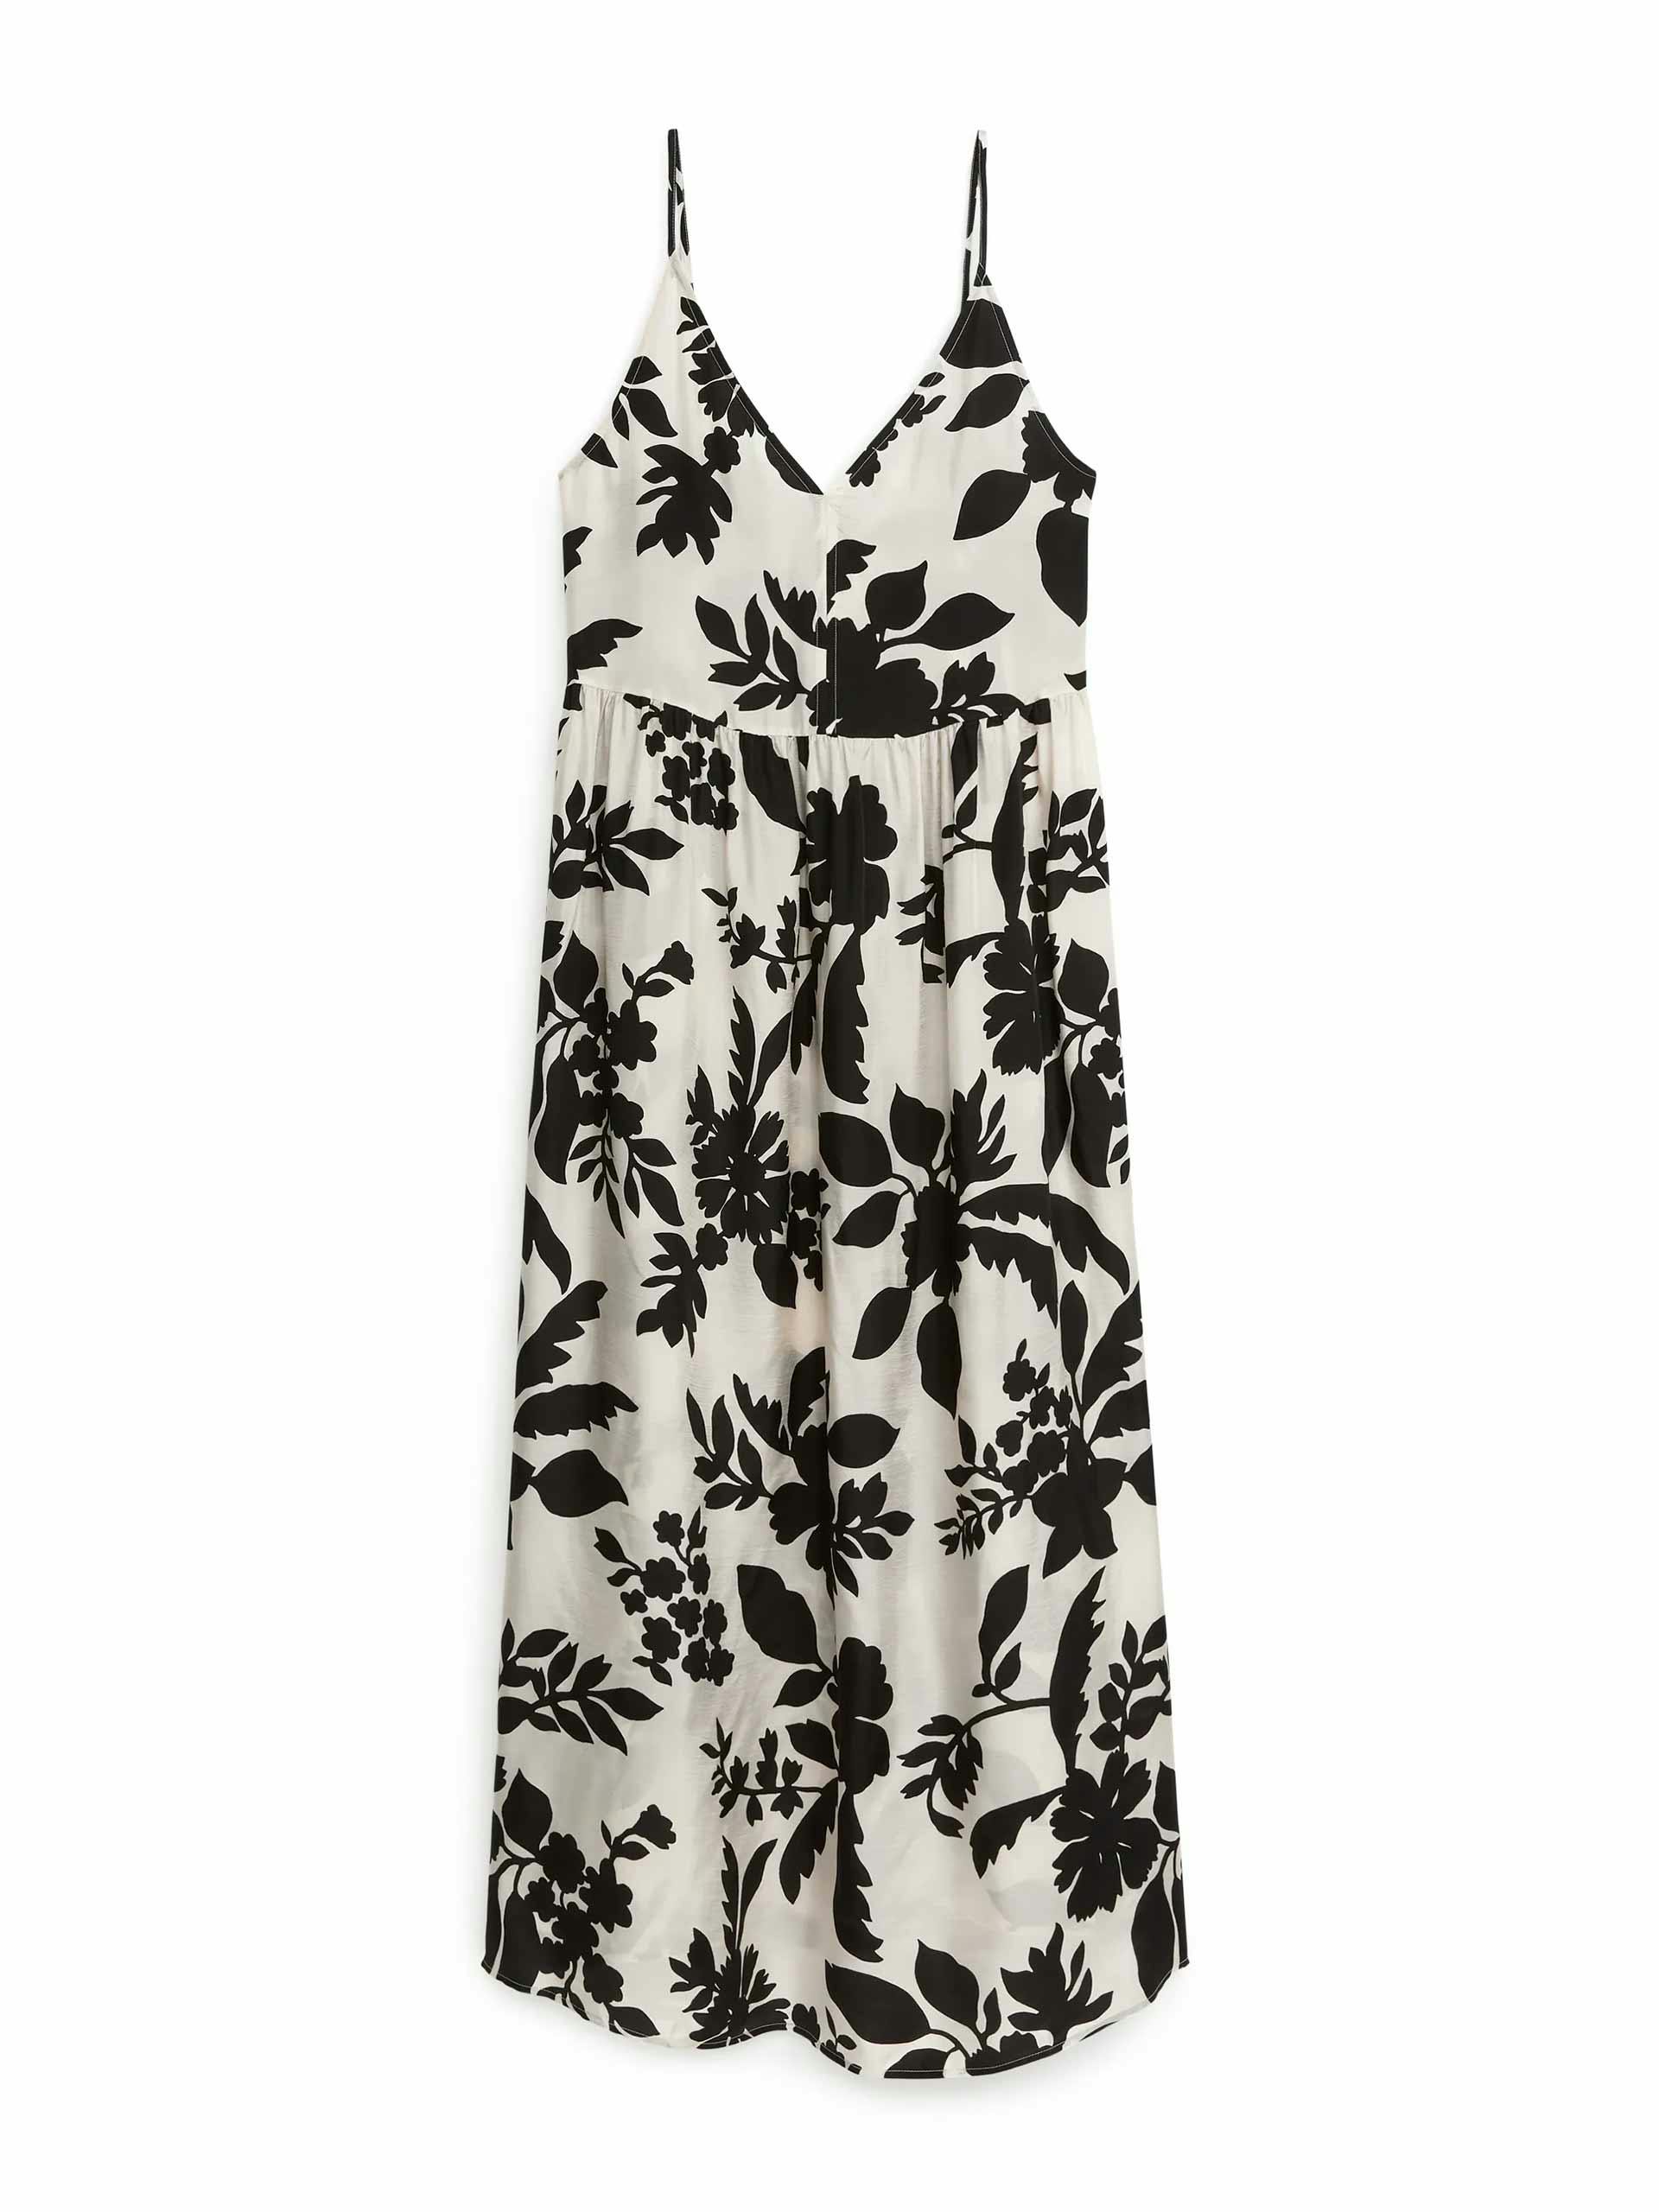 White and black floral-print tiered strap dress